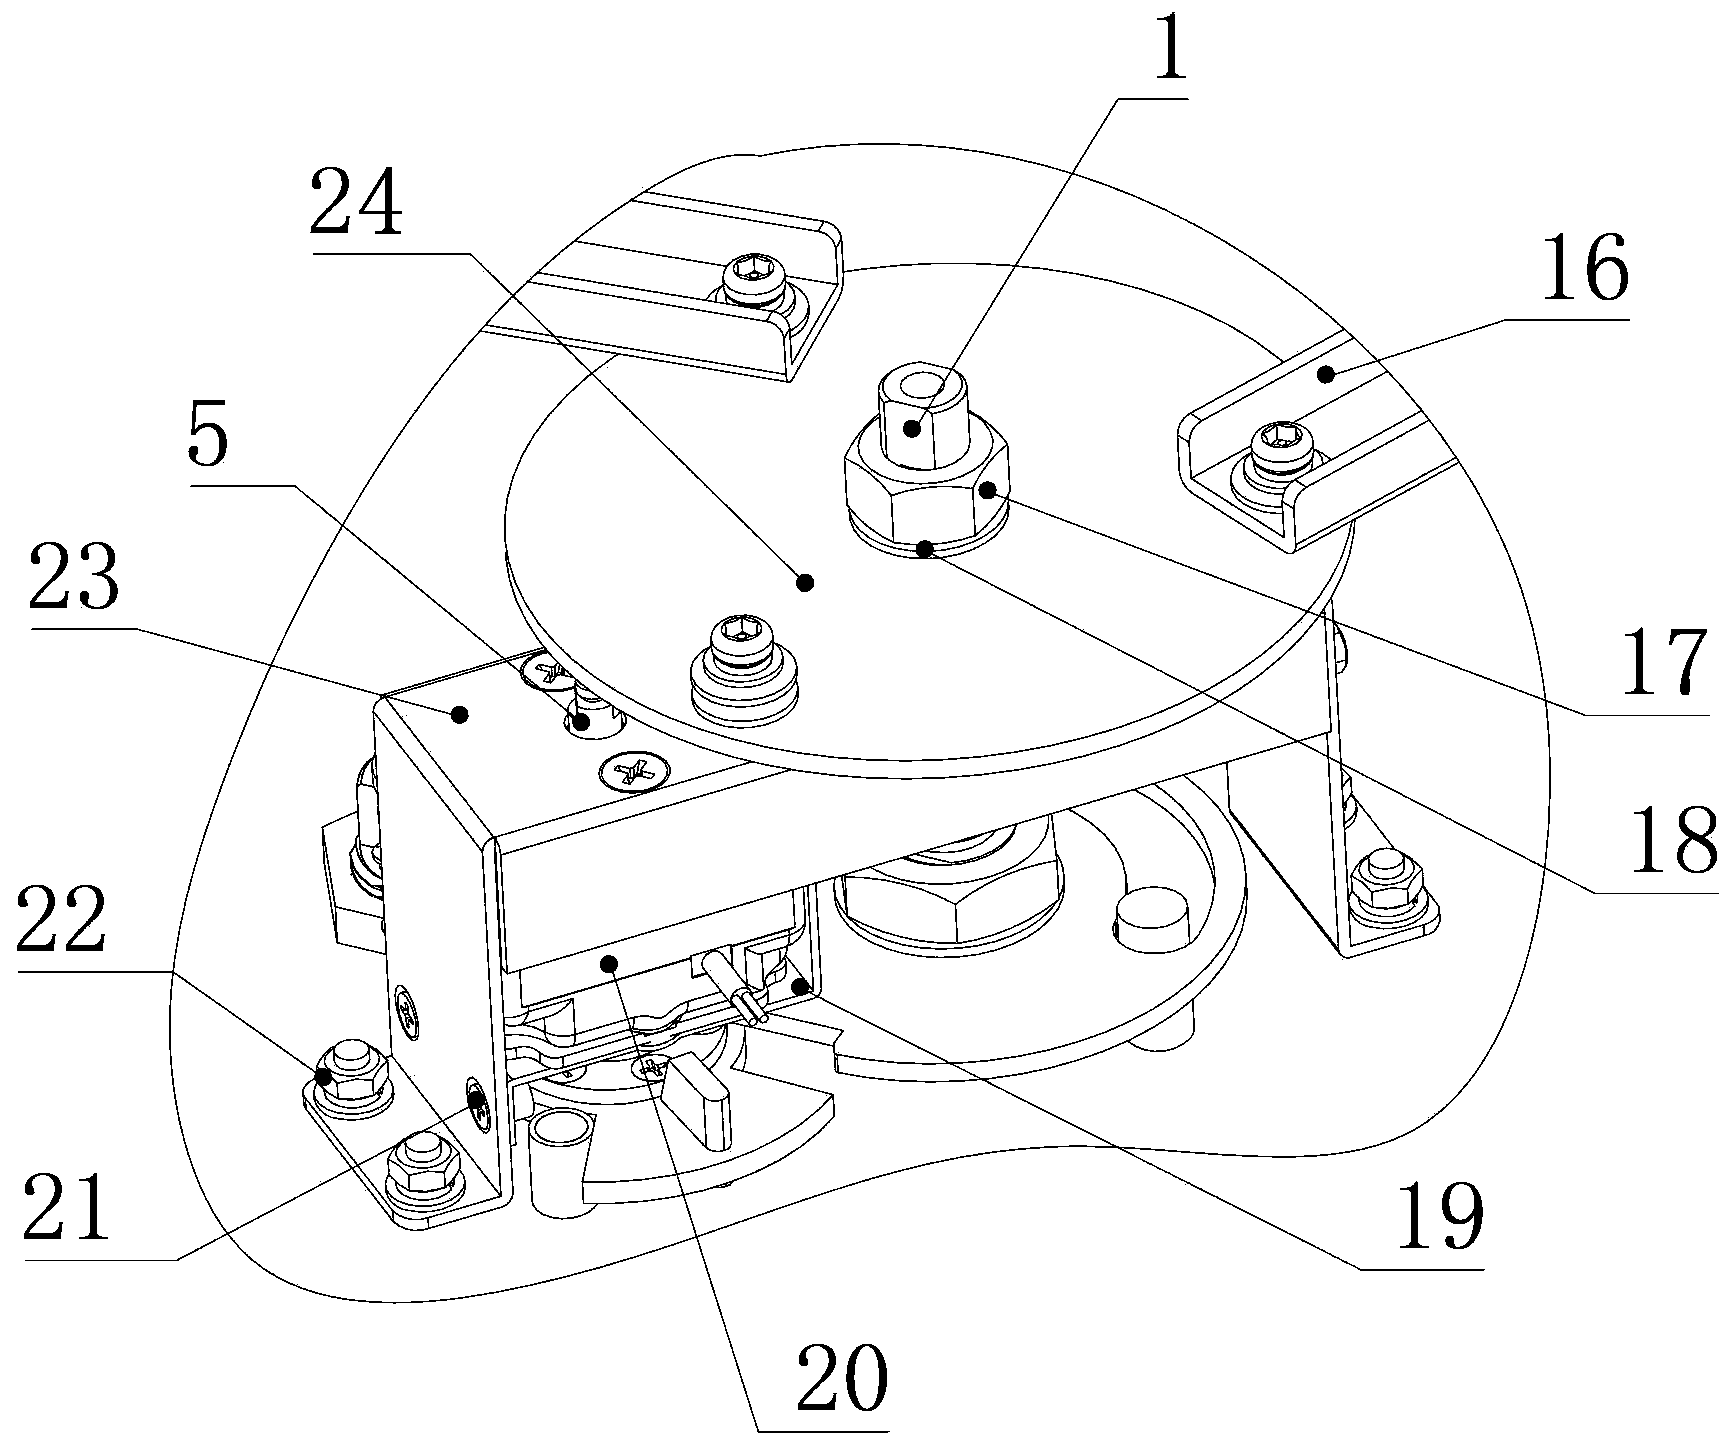 Device applied to locking and opening well lid lock and stably keeping